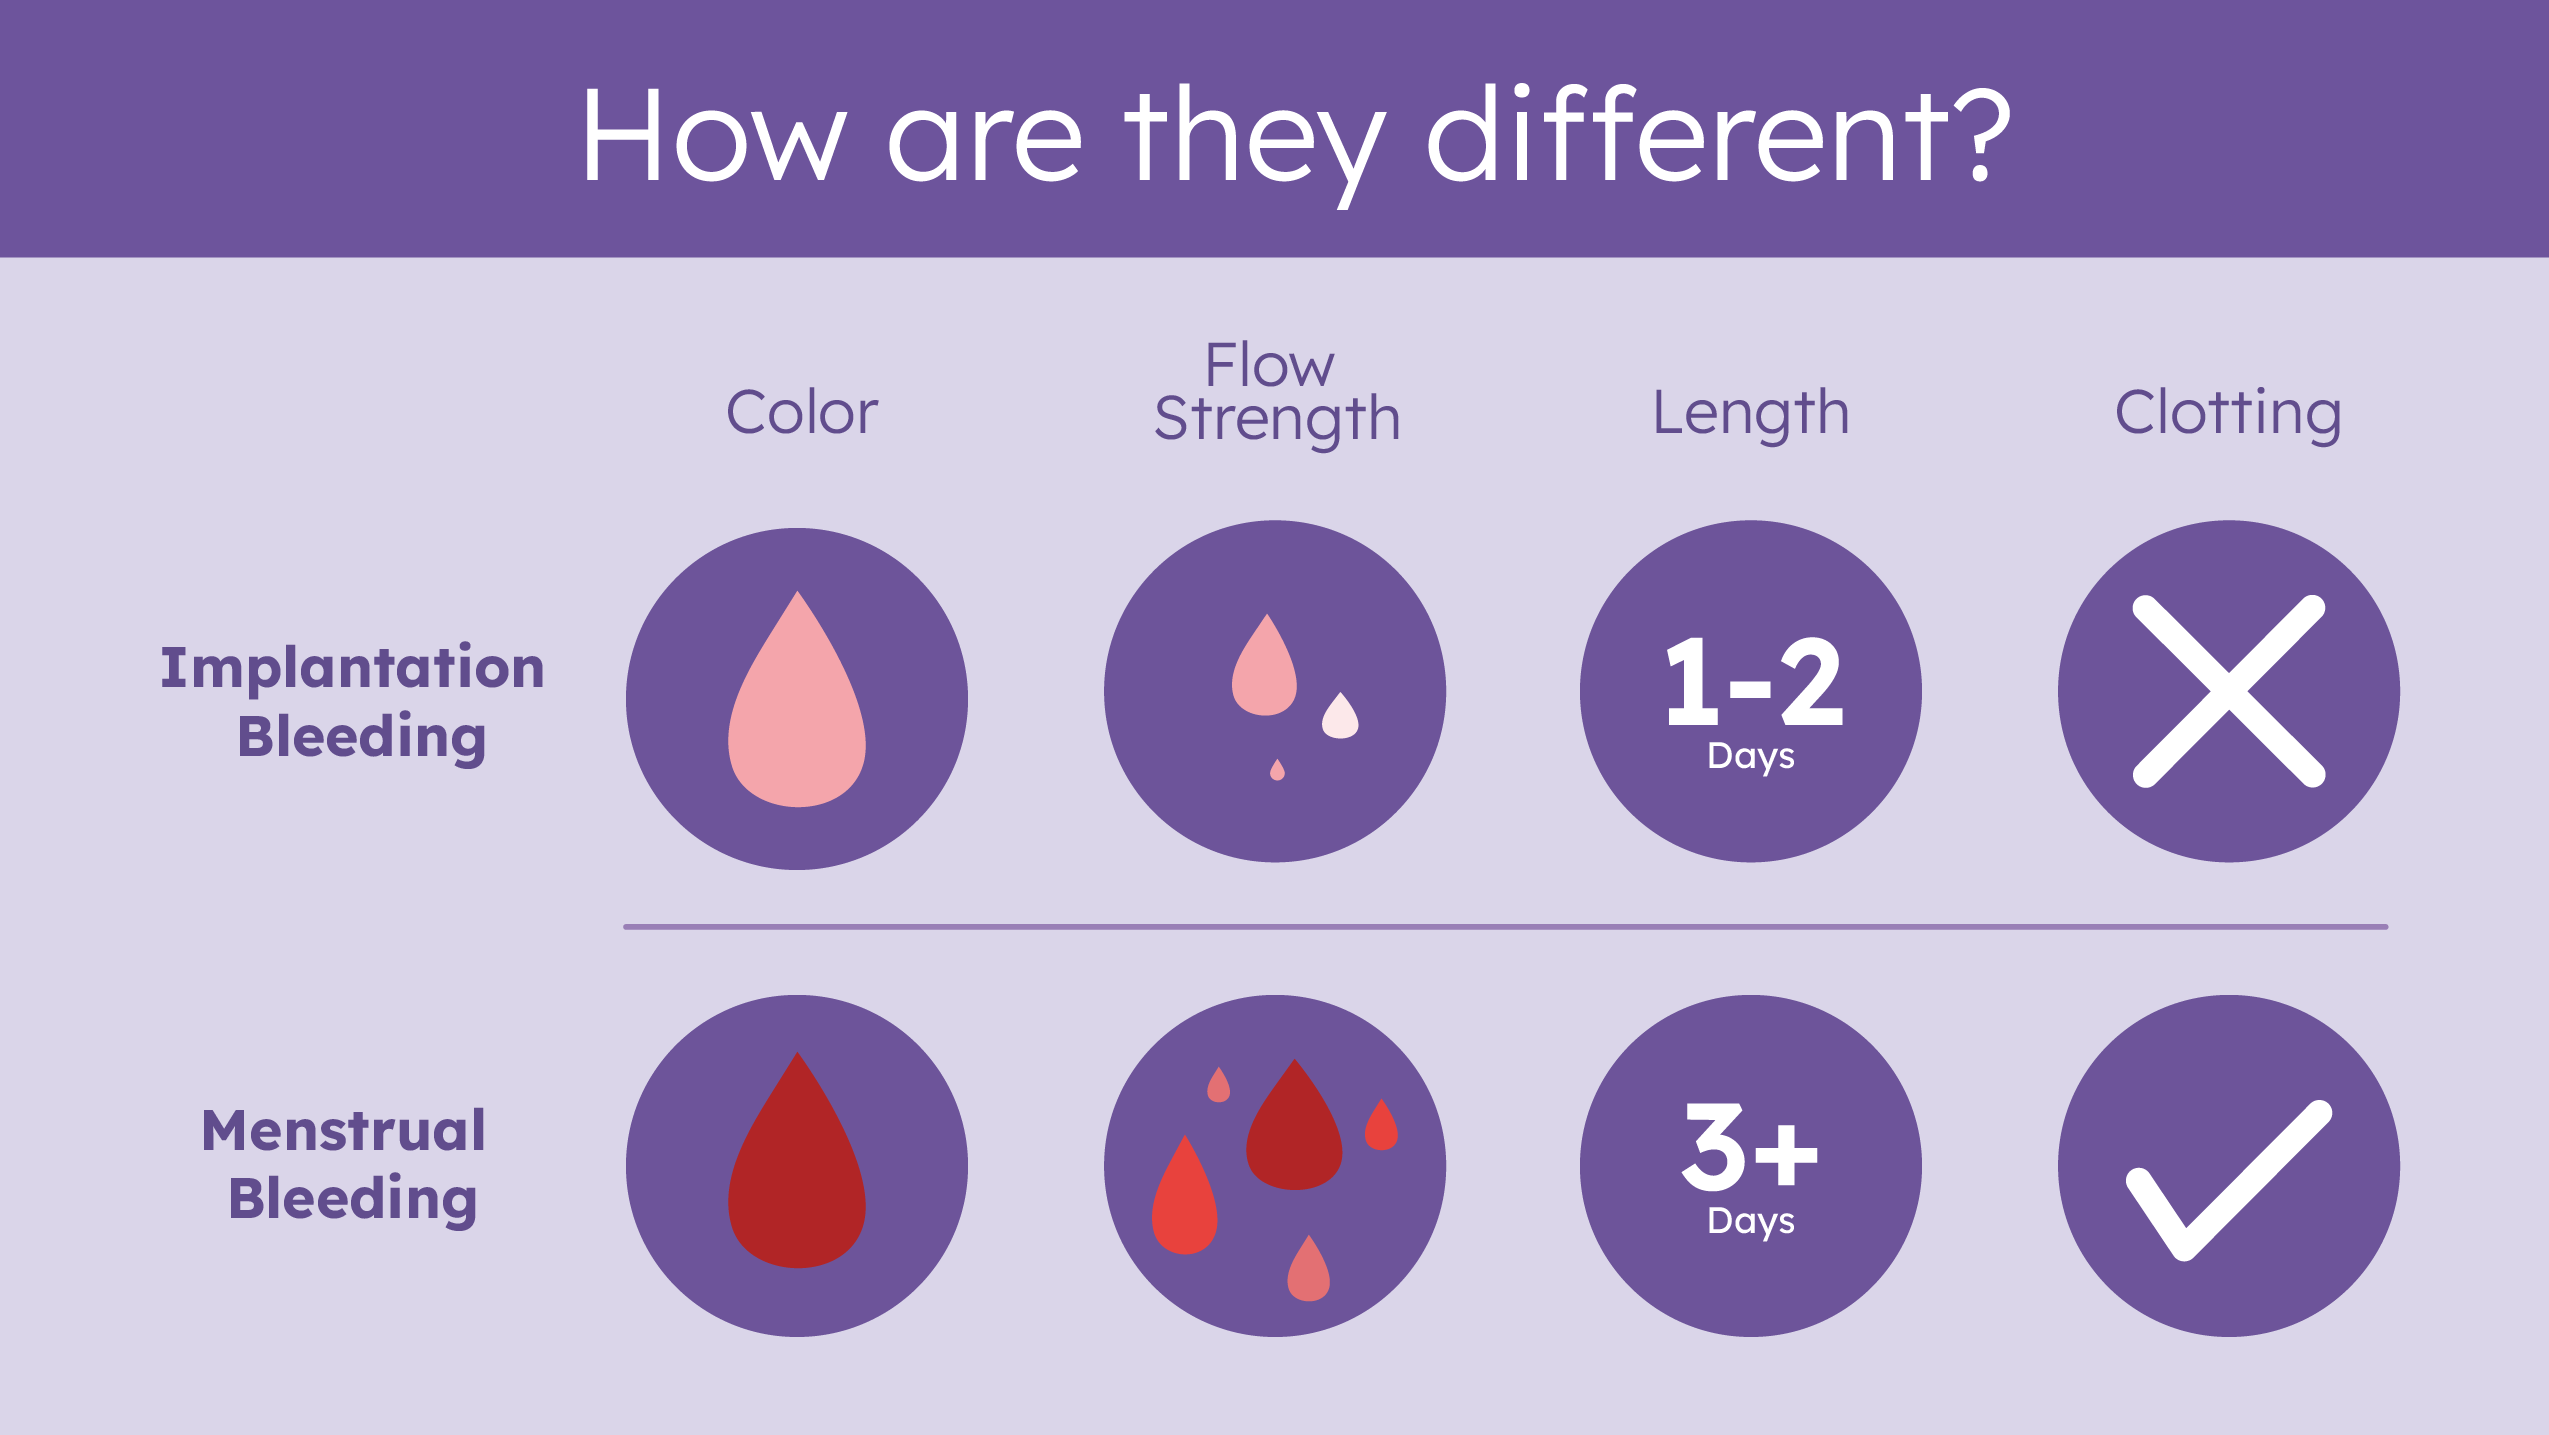 What's the difference between implantation and period bleeding?